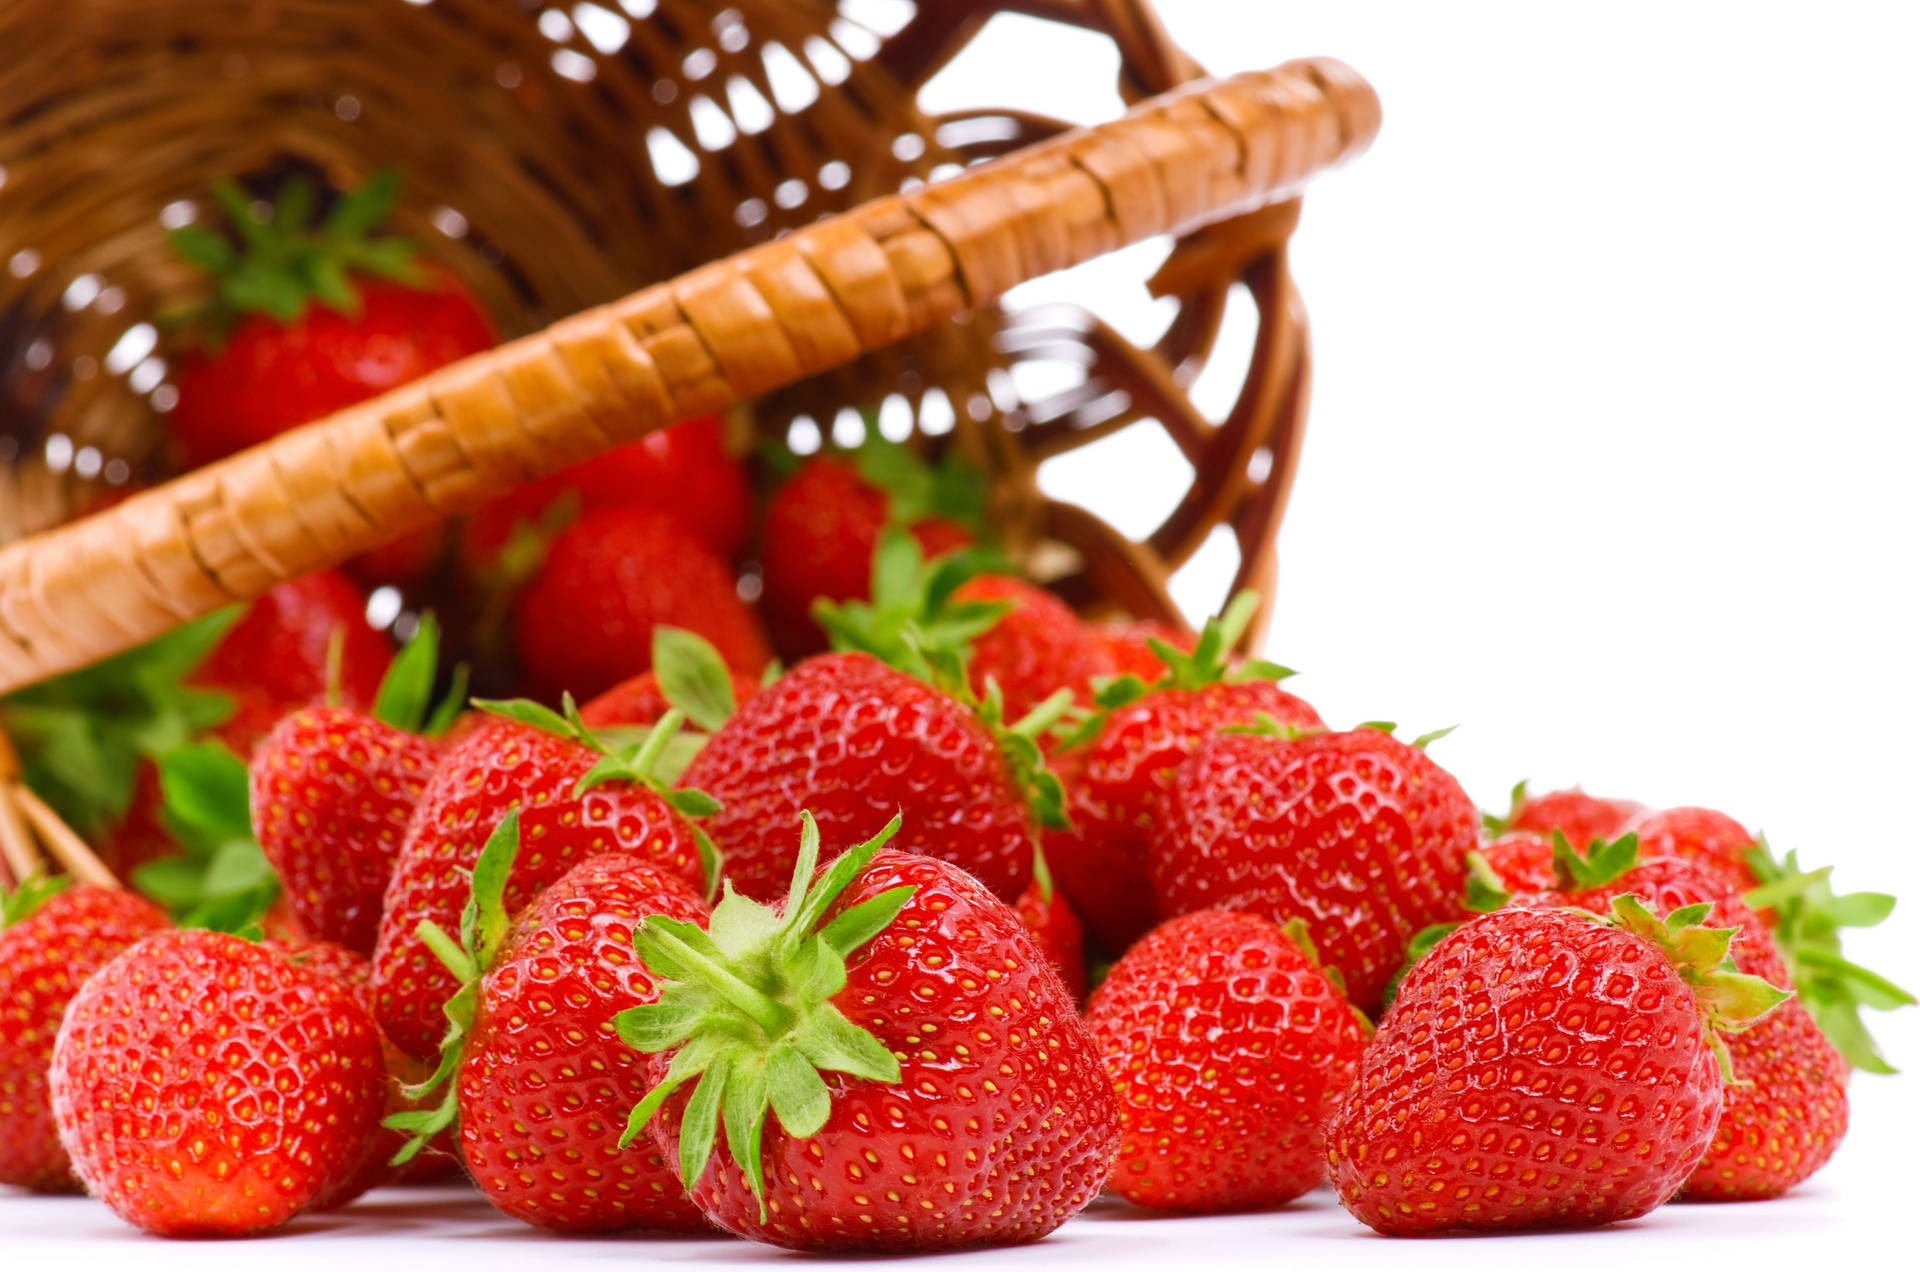 Fresh Strawberries Tumbling From A Wicker Basket Background